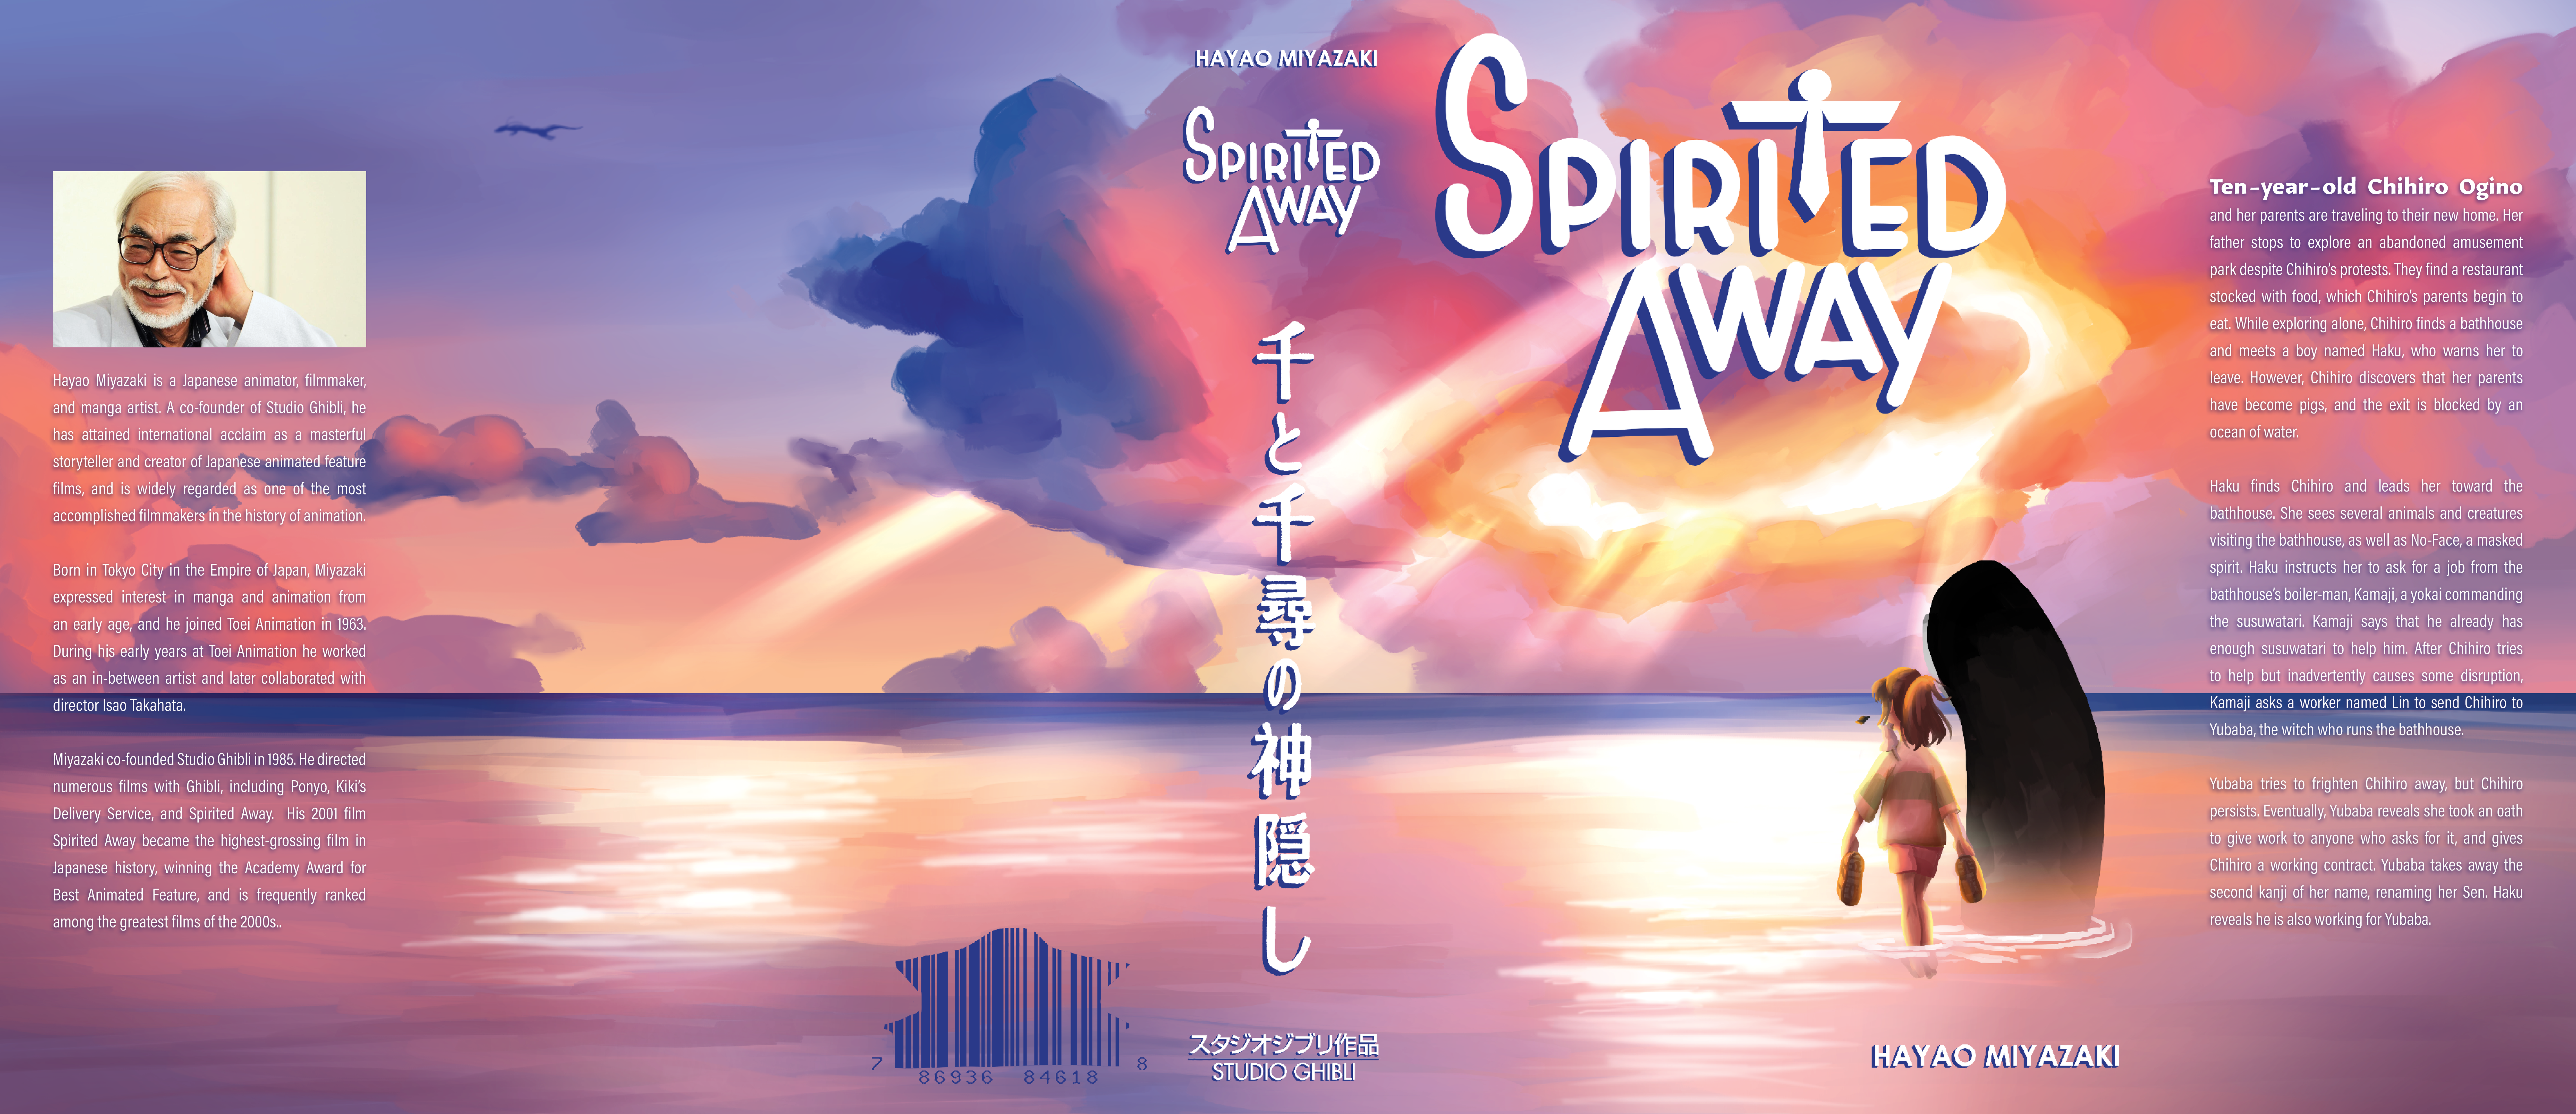 Spirited Away Book Cover